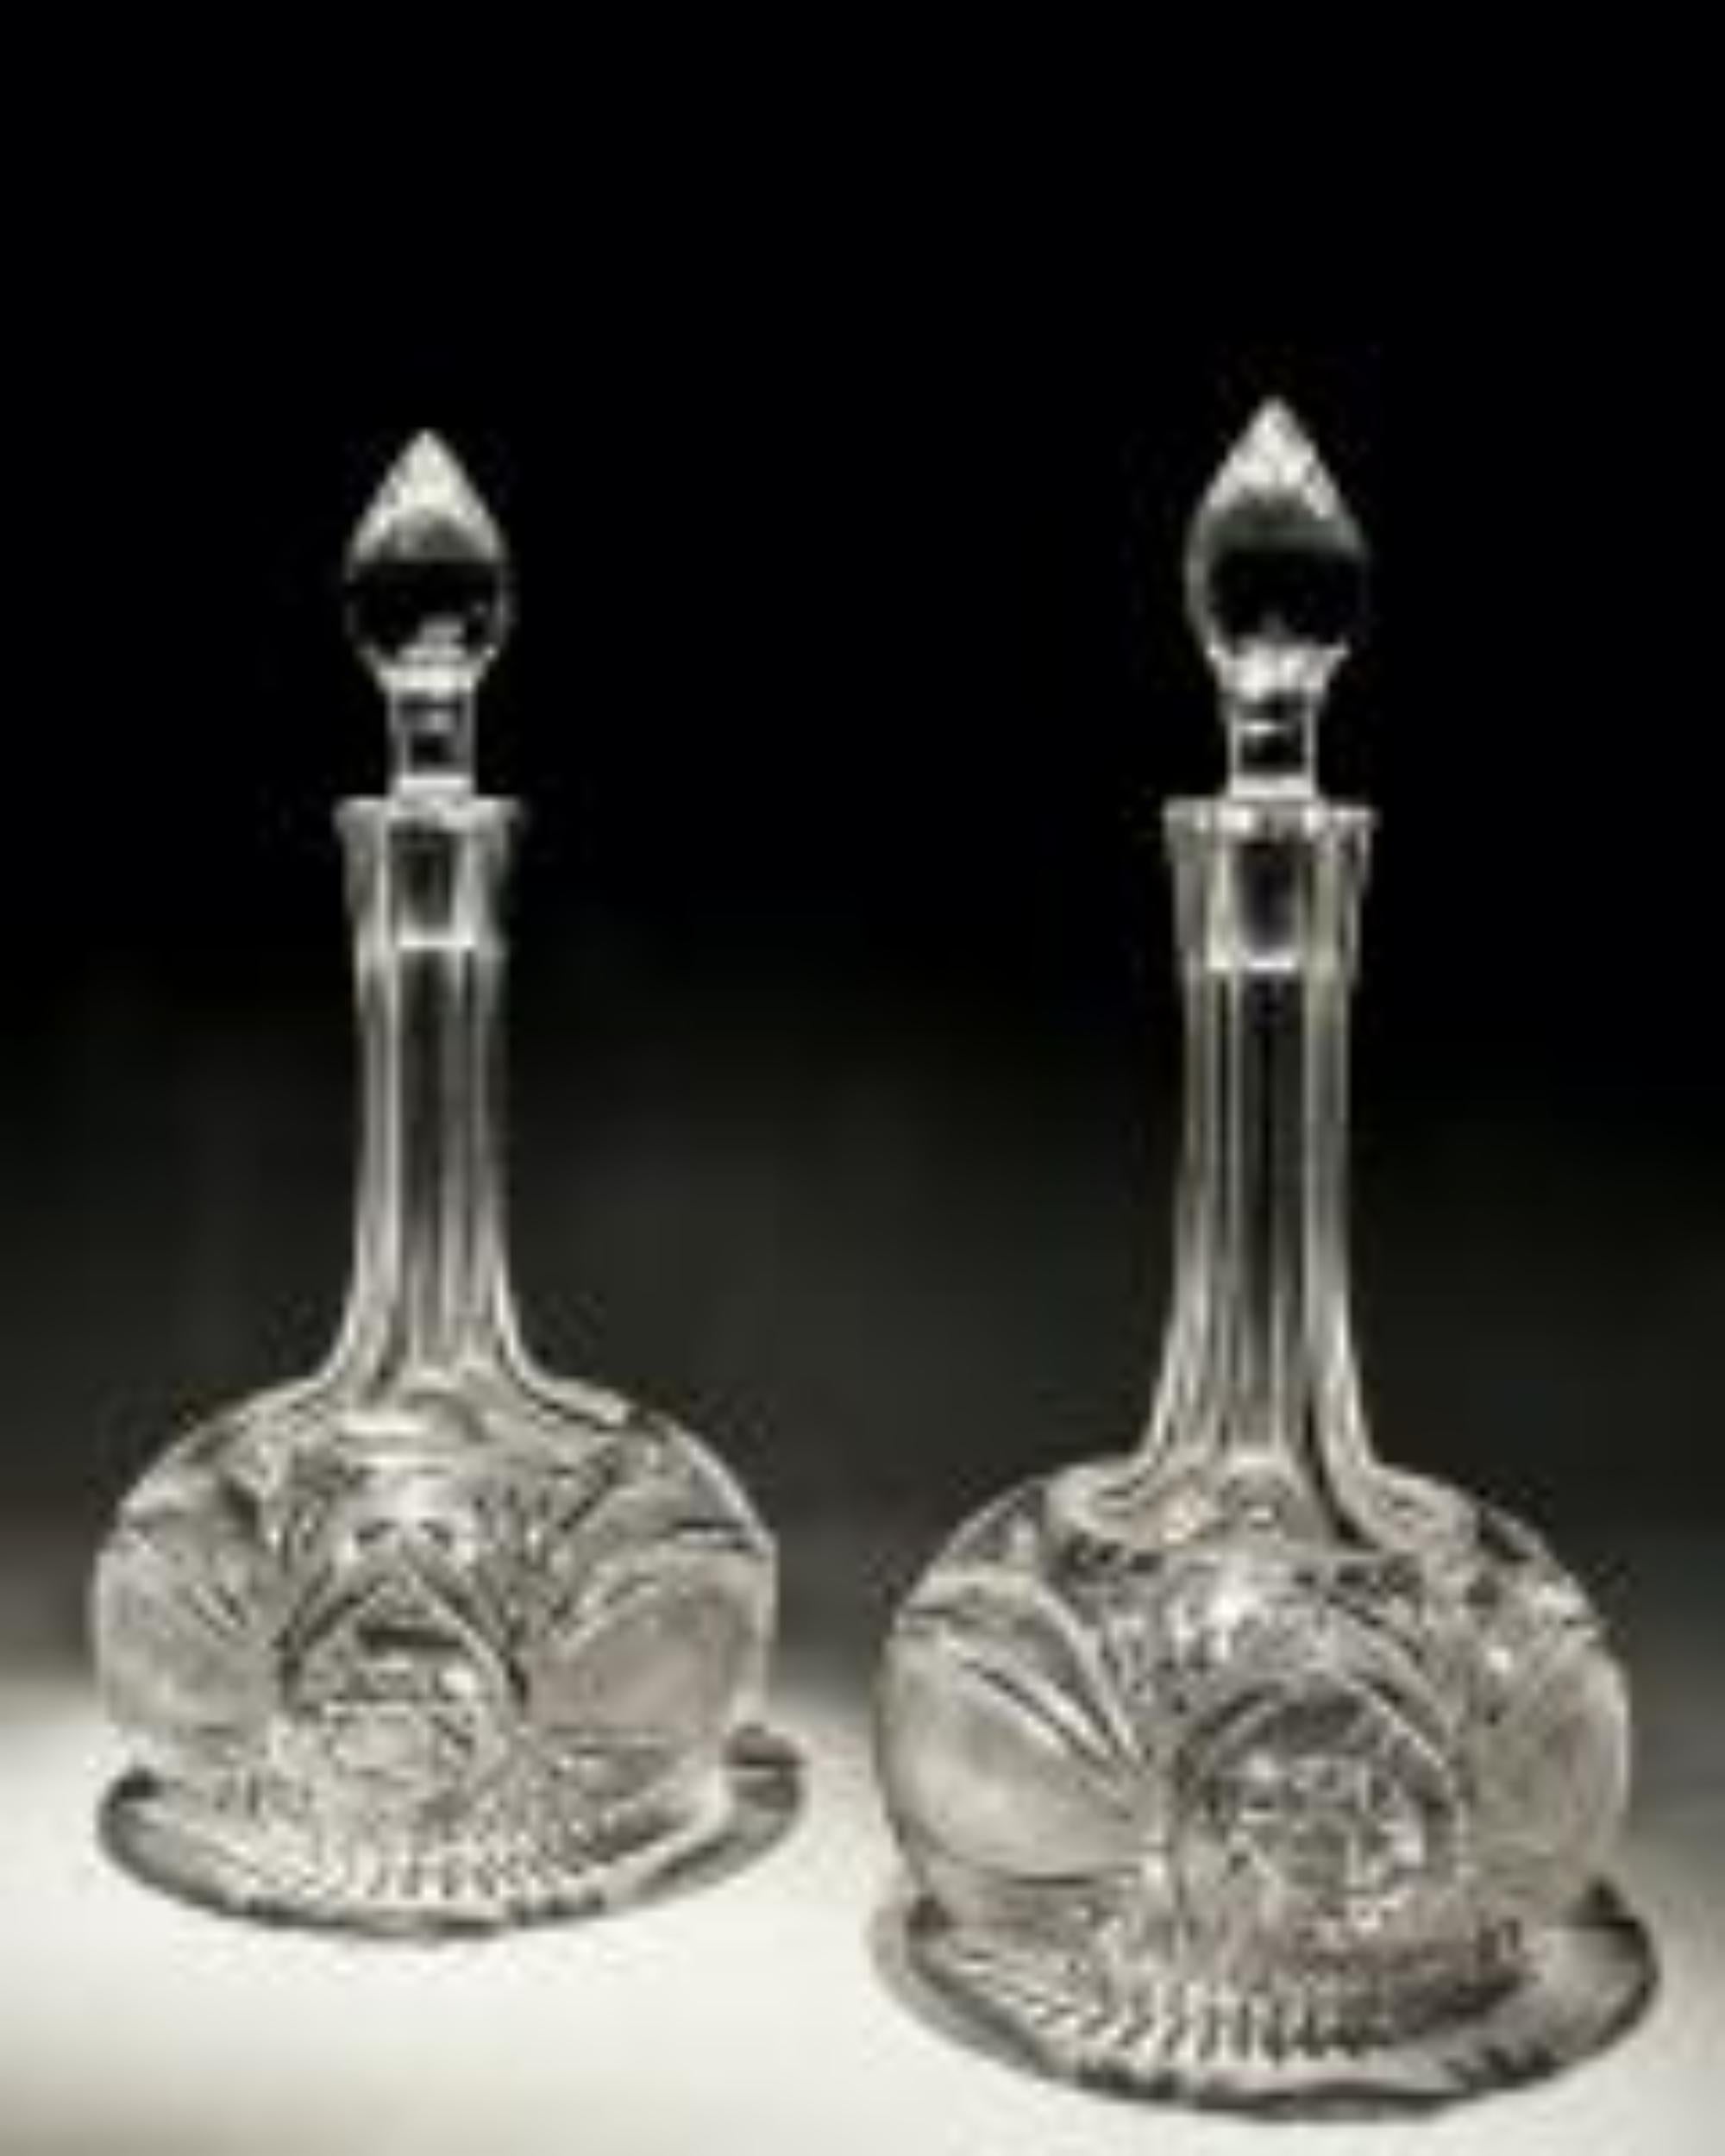 A pair of elaborately cut shaft and globe Victorian decanters.

England, circa 1880.

Measures: Height: 29.5 cm (11 1/2